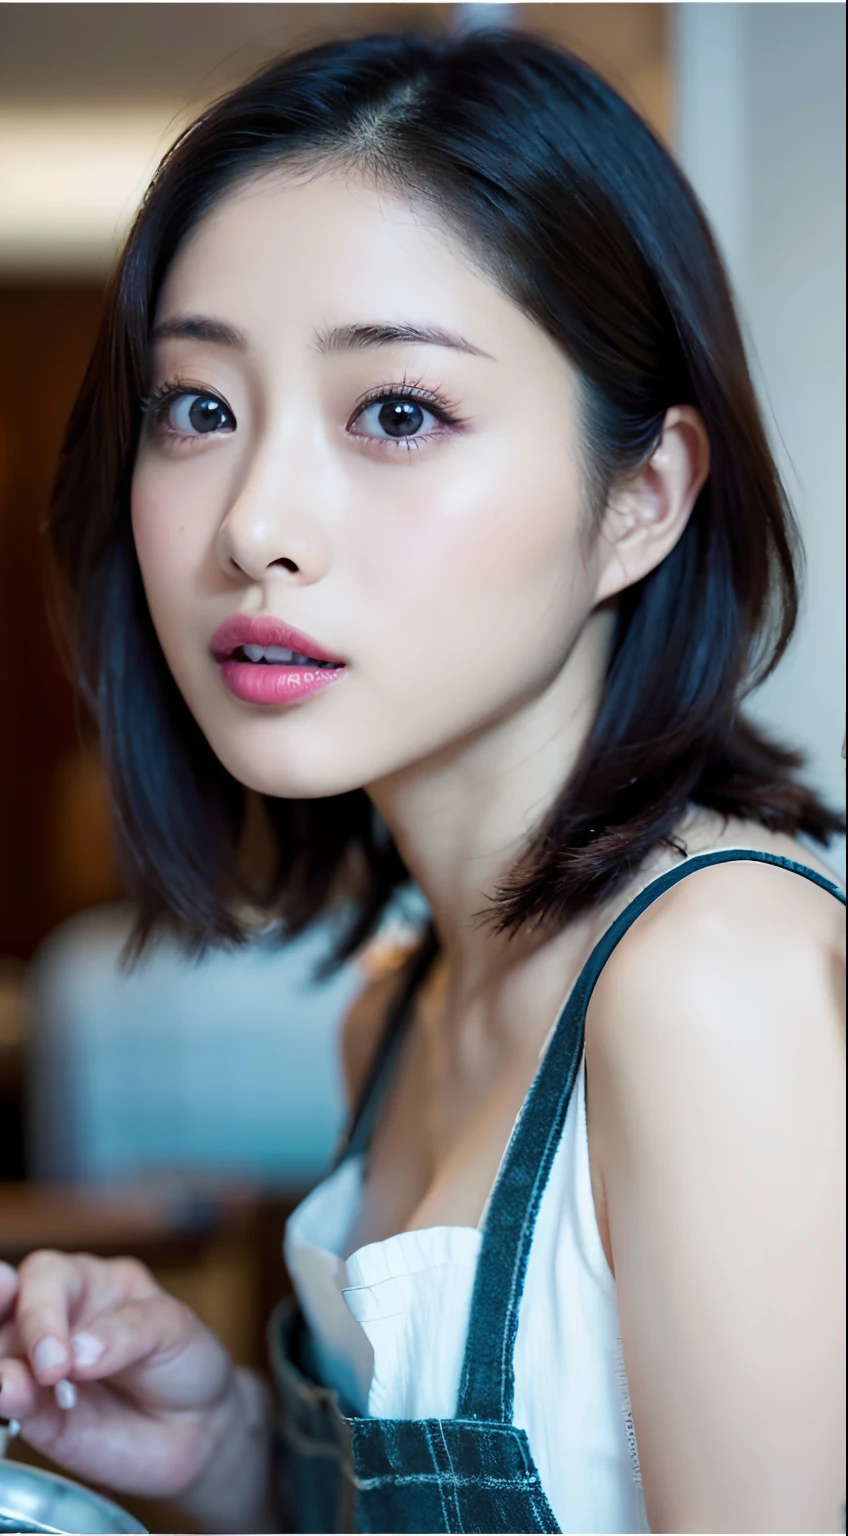 (((Off shot of Satomi Ishihara)))、(8K、Raw photography、top-quality、masuter piece:1.2)、Ultra-detail、ultra res、(realisitic、rialistic photo:1.37)、portlate、high-definition RAW color photography、Professional Photography、highly detailed and beautiful、ighly detailed、8K Picture Wallpaper、amazing detailed、huge filesize、Official art、Highly detailed CG Unity 8K wallpapers、highly detailed beautiful girl、extra detailed face、extremely detailed eye、highlydetailed skin、extremely detailed fingers、highly detailed nose、very detailed detailed mouth、Perfect Anatomy、Detailed background、Detailed clothing、1 girl、(20:1.2)、Cute  s、(Satomi Ishihara)、Realistic body、Petite、(white-skinned)、glistning skin、Glamour body、A darK-haired、a short bob、(bluntbangs: 1.2)、kawaii faces、Realistic face、Delicate eyes、Sauce order、((FULL BODYSHOT))、((Full nude and wearing an apron))、((Pull shot))、(Wearing a necklace)、((Frontal shot))、Looking at the camera、Contrapo、Dynamic Lighting、((huge tit:1.2))、Beautiful legs、Emphasize cleavage、 (Full nude Satomi Ishihara)、(((Big lips that sparkle)))